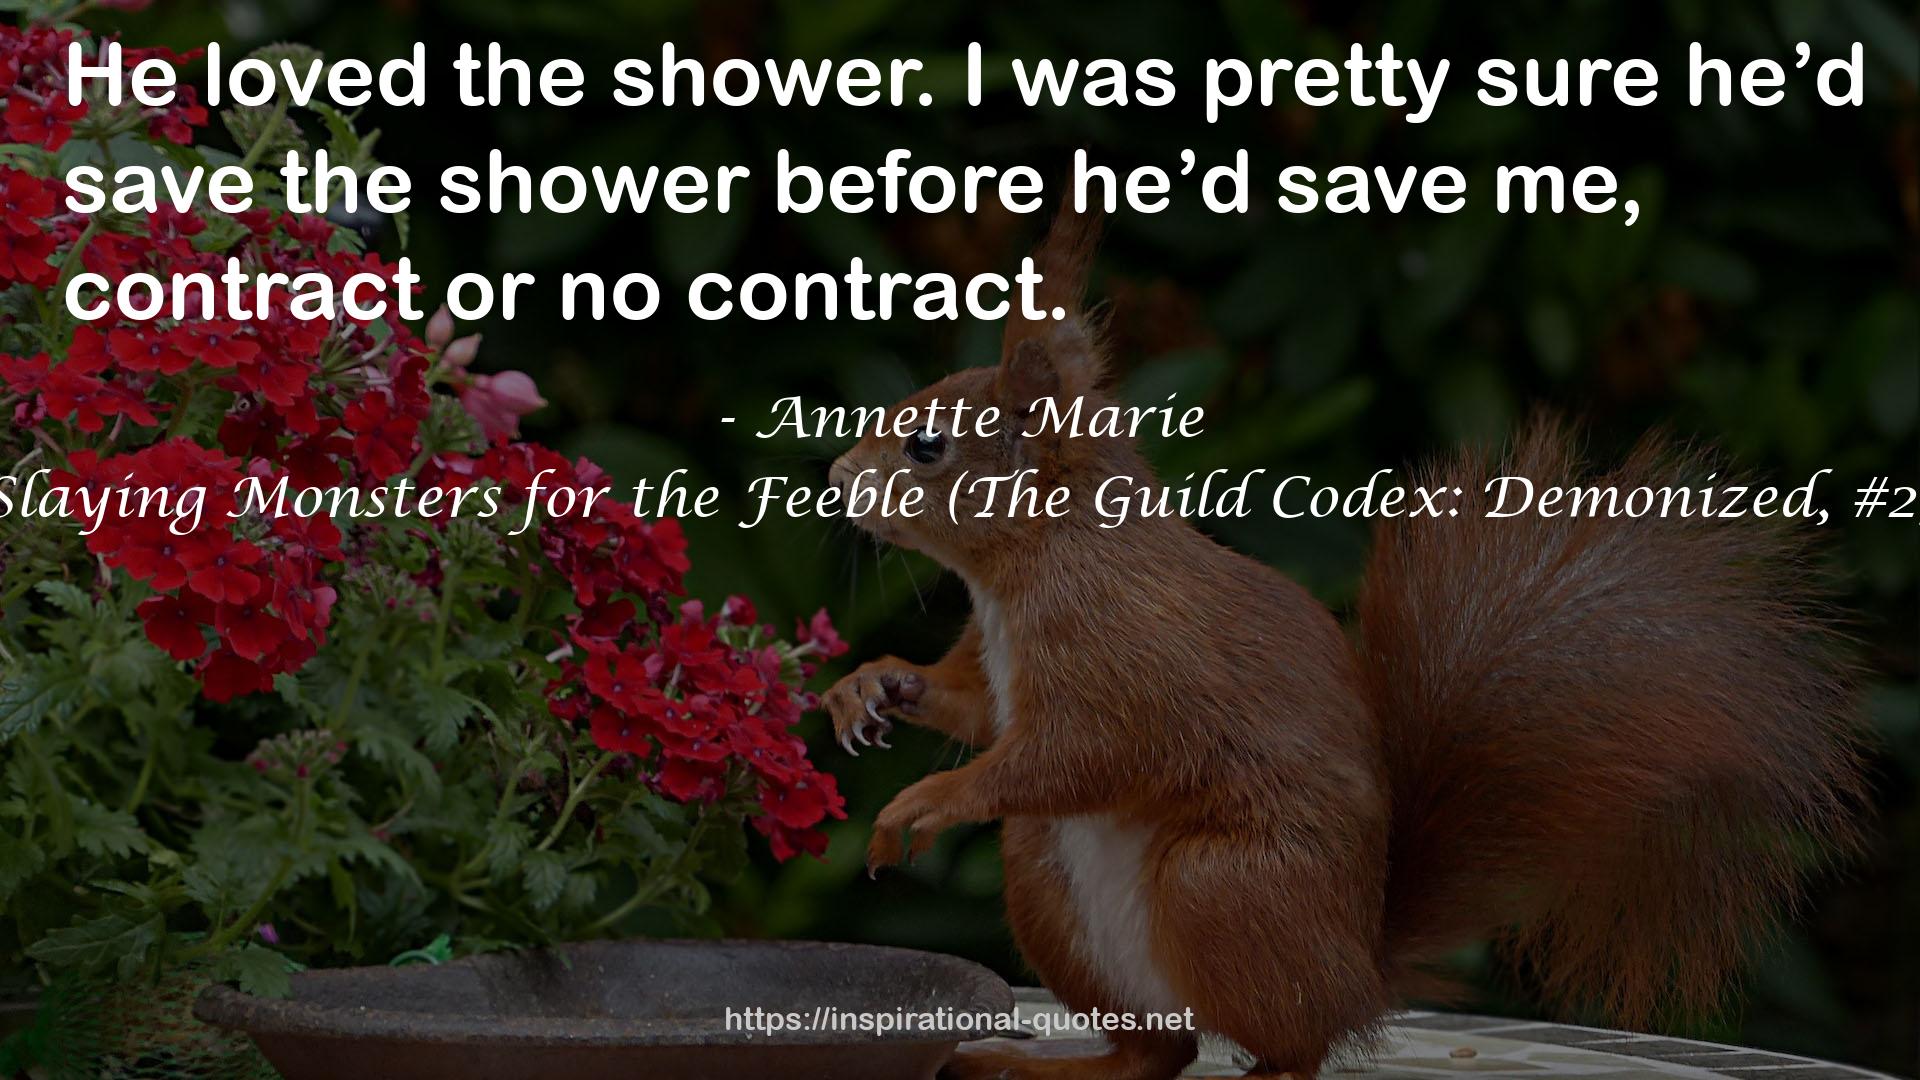 Slaying Monsters for the Feeble (The Guild Codex: Demonized, #2) QUOTES